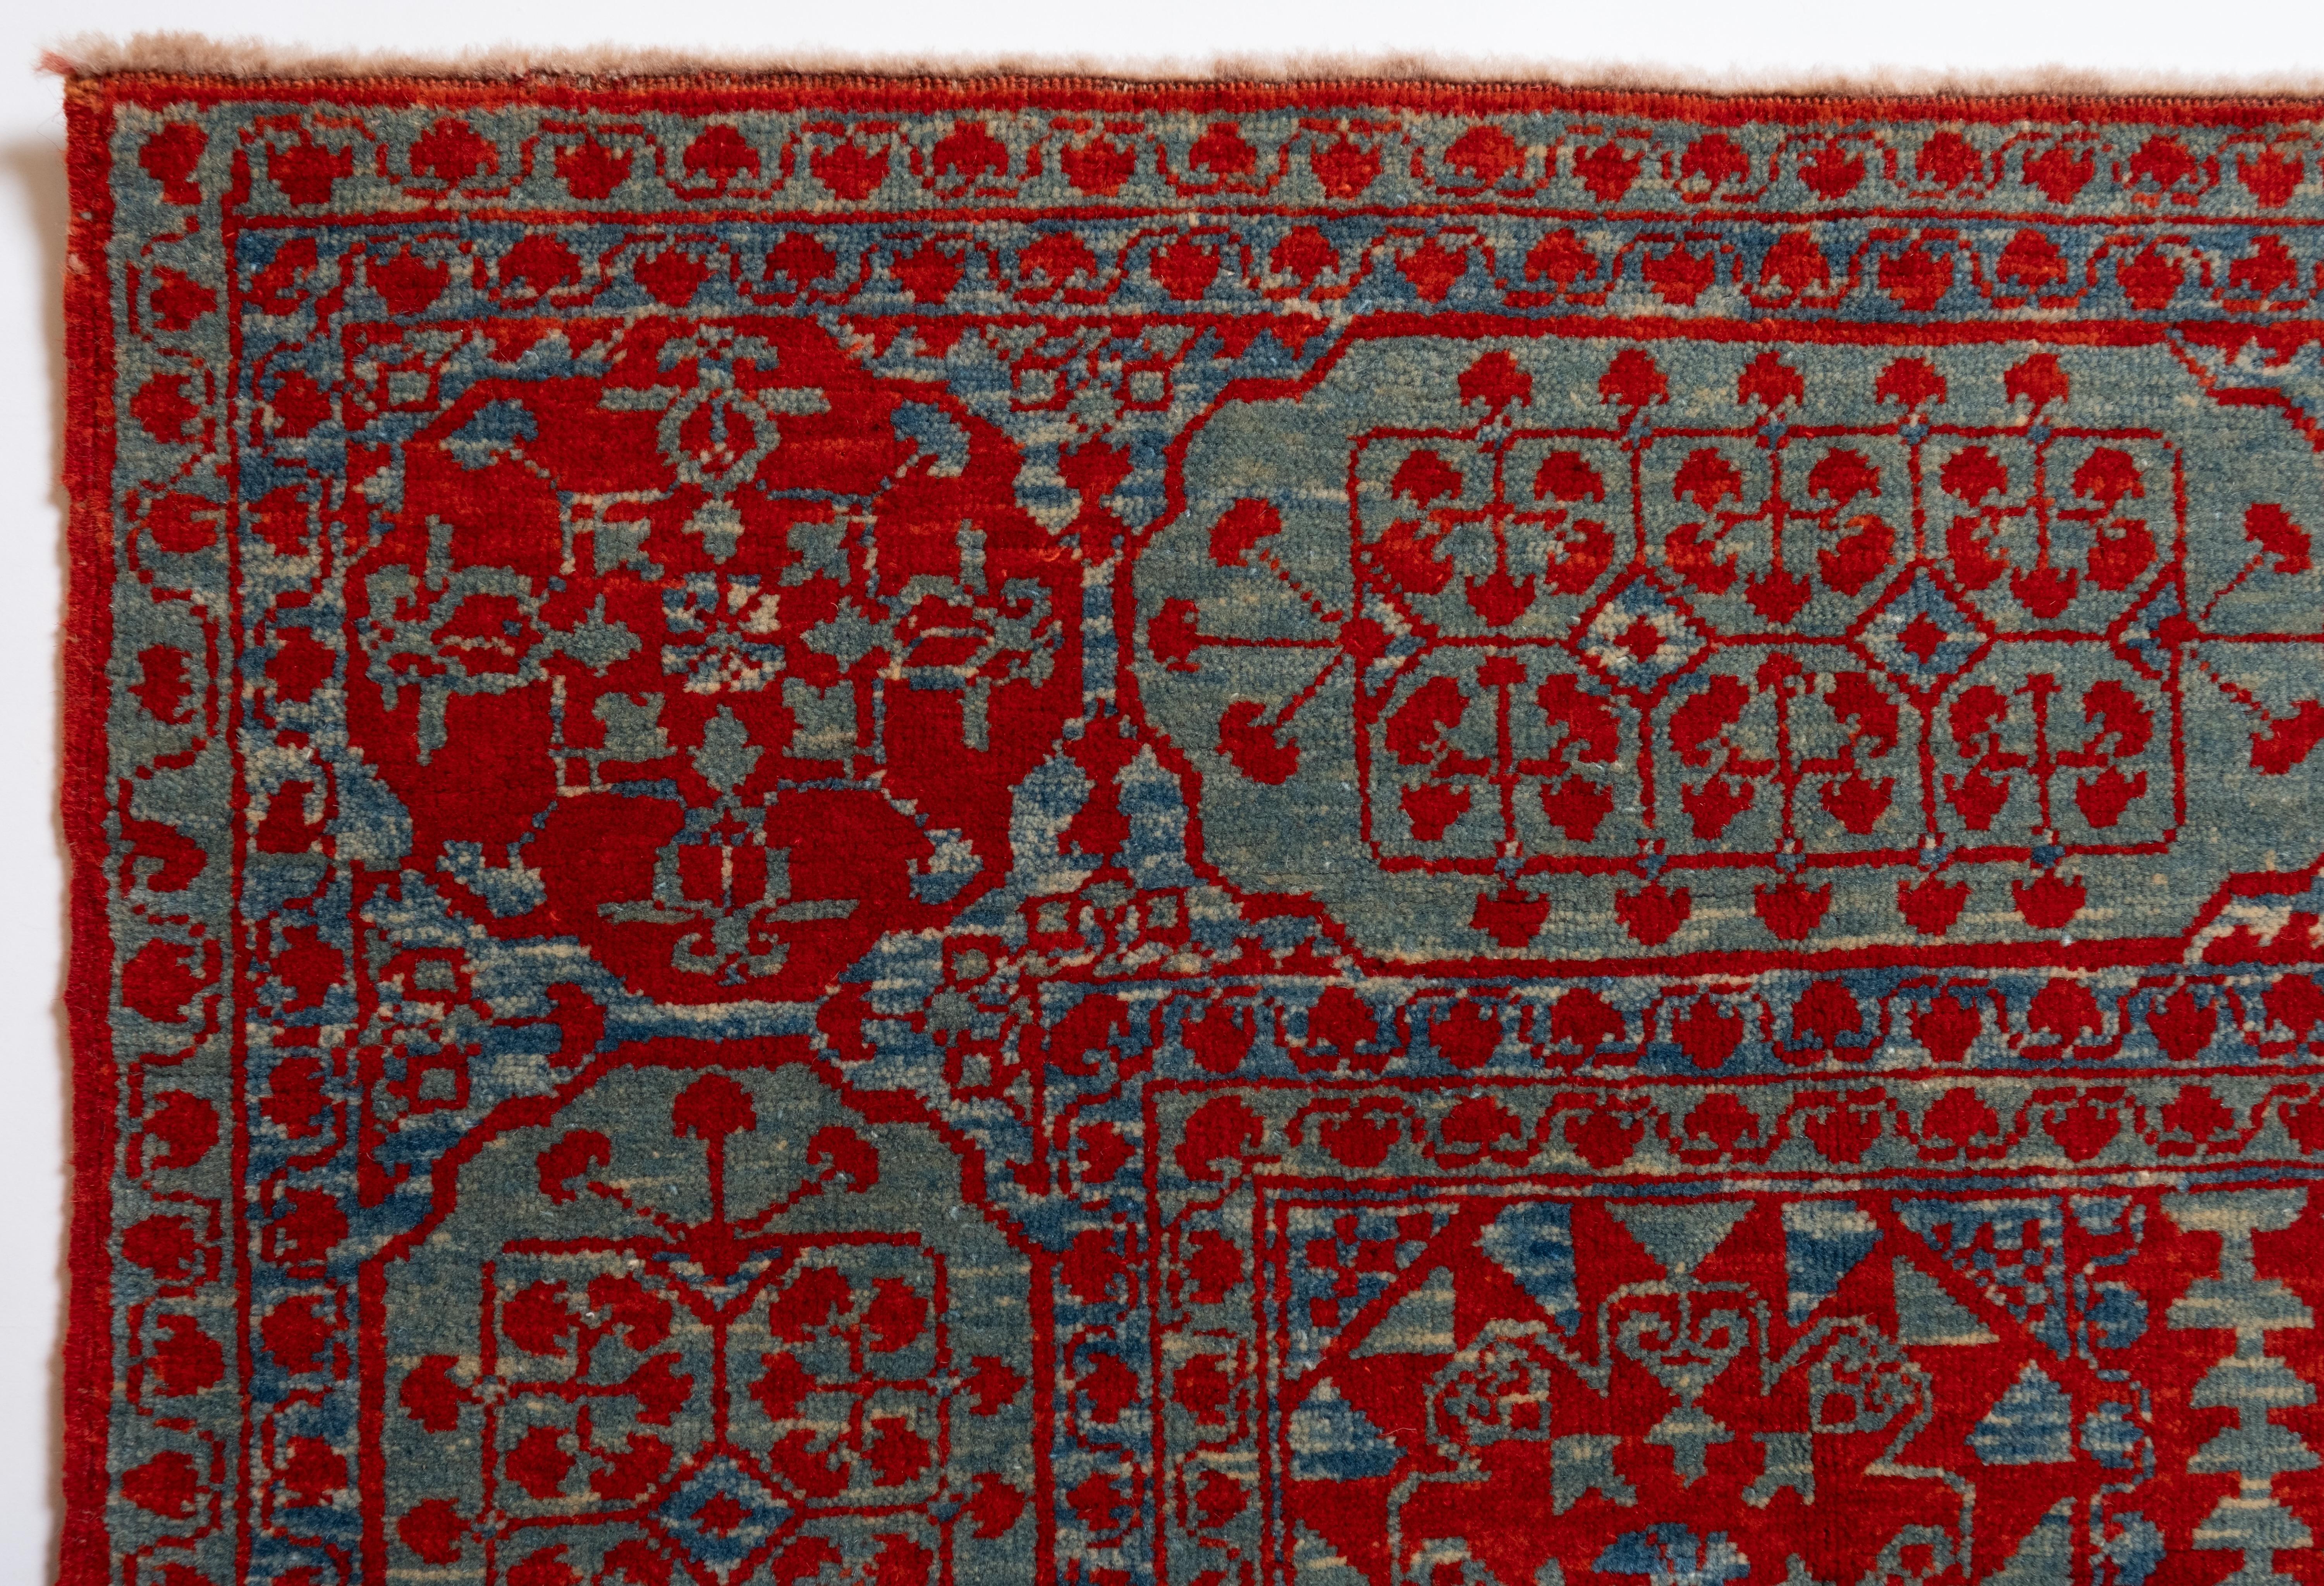 This rug with the central star was designed in the early 16th-century rug by Mamluk Sultane of Cairo, Egypt. Attempting to read early carpets produced in workshops in Cairo provides an entirely different set of challenges. Cairene carpets,